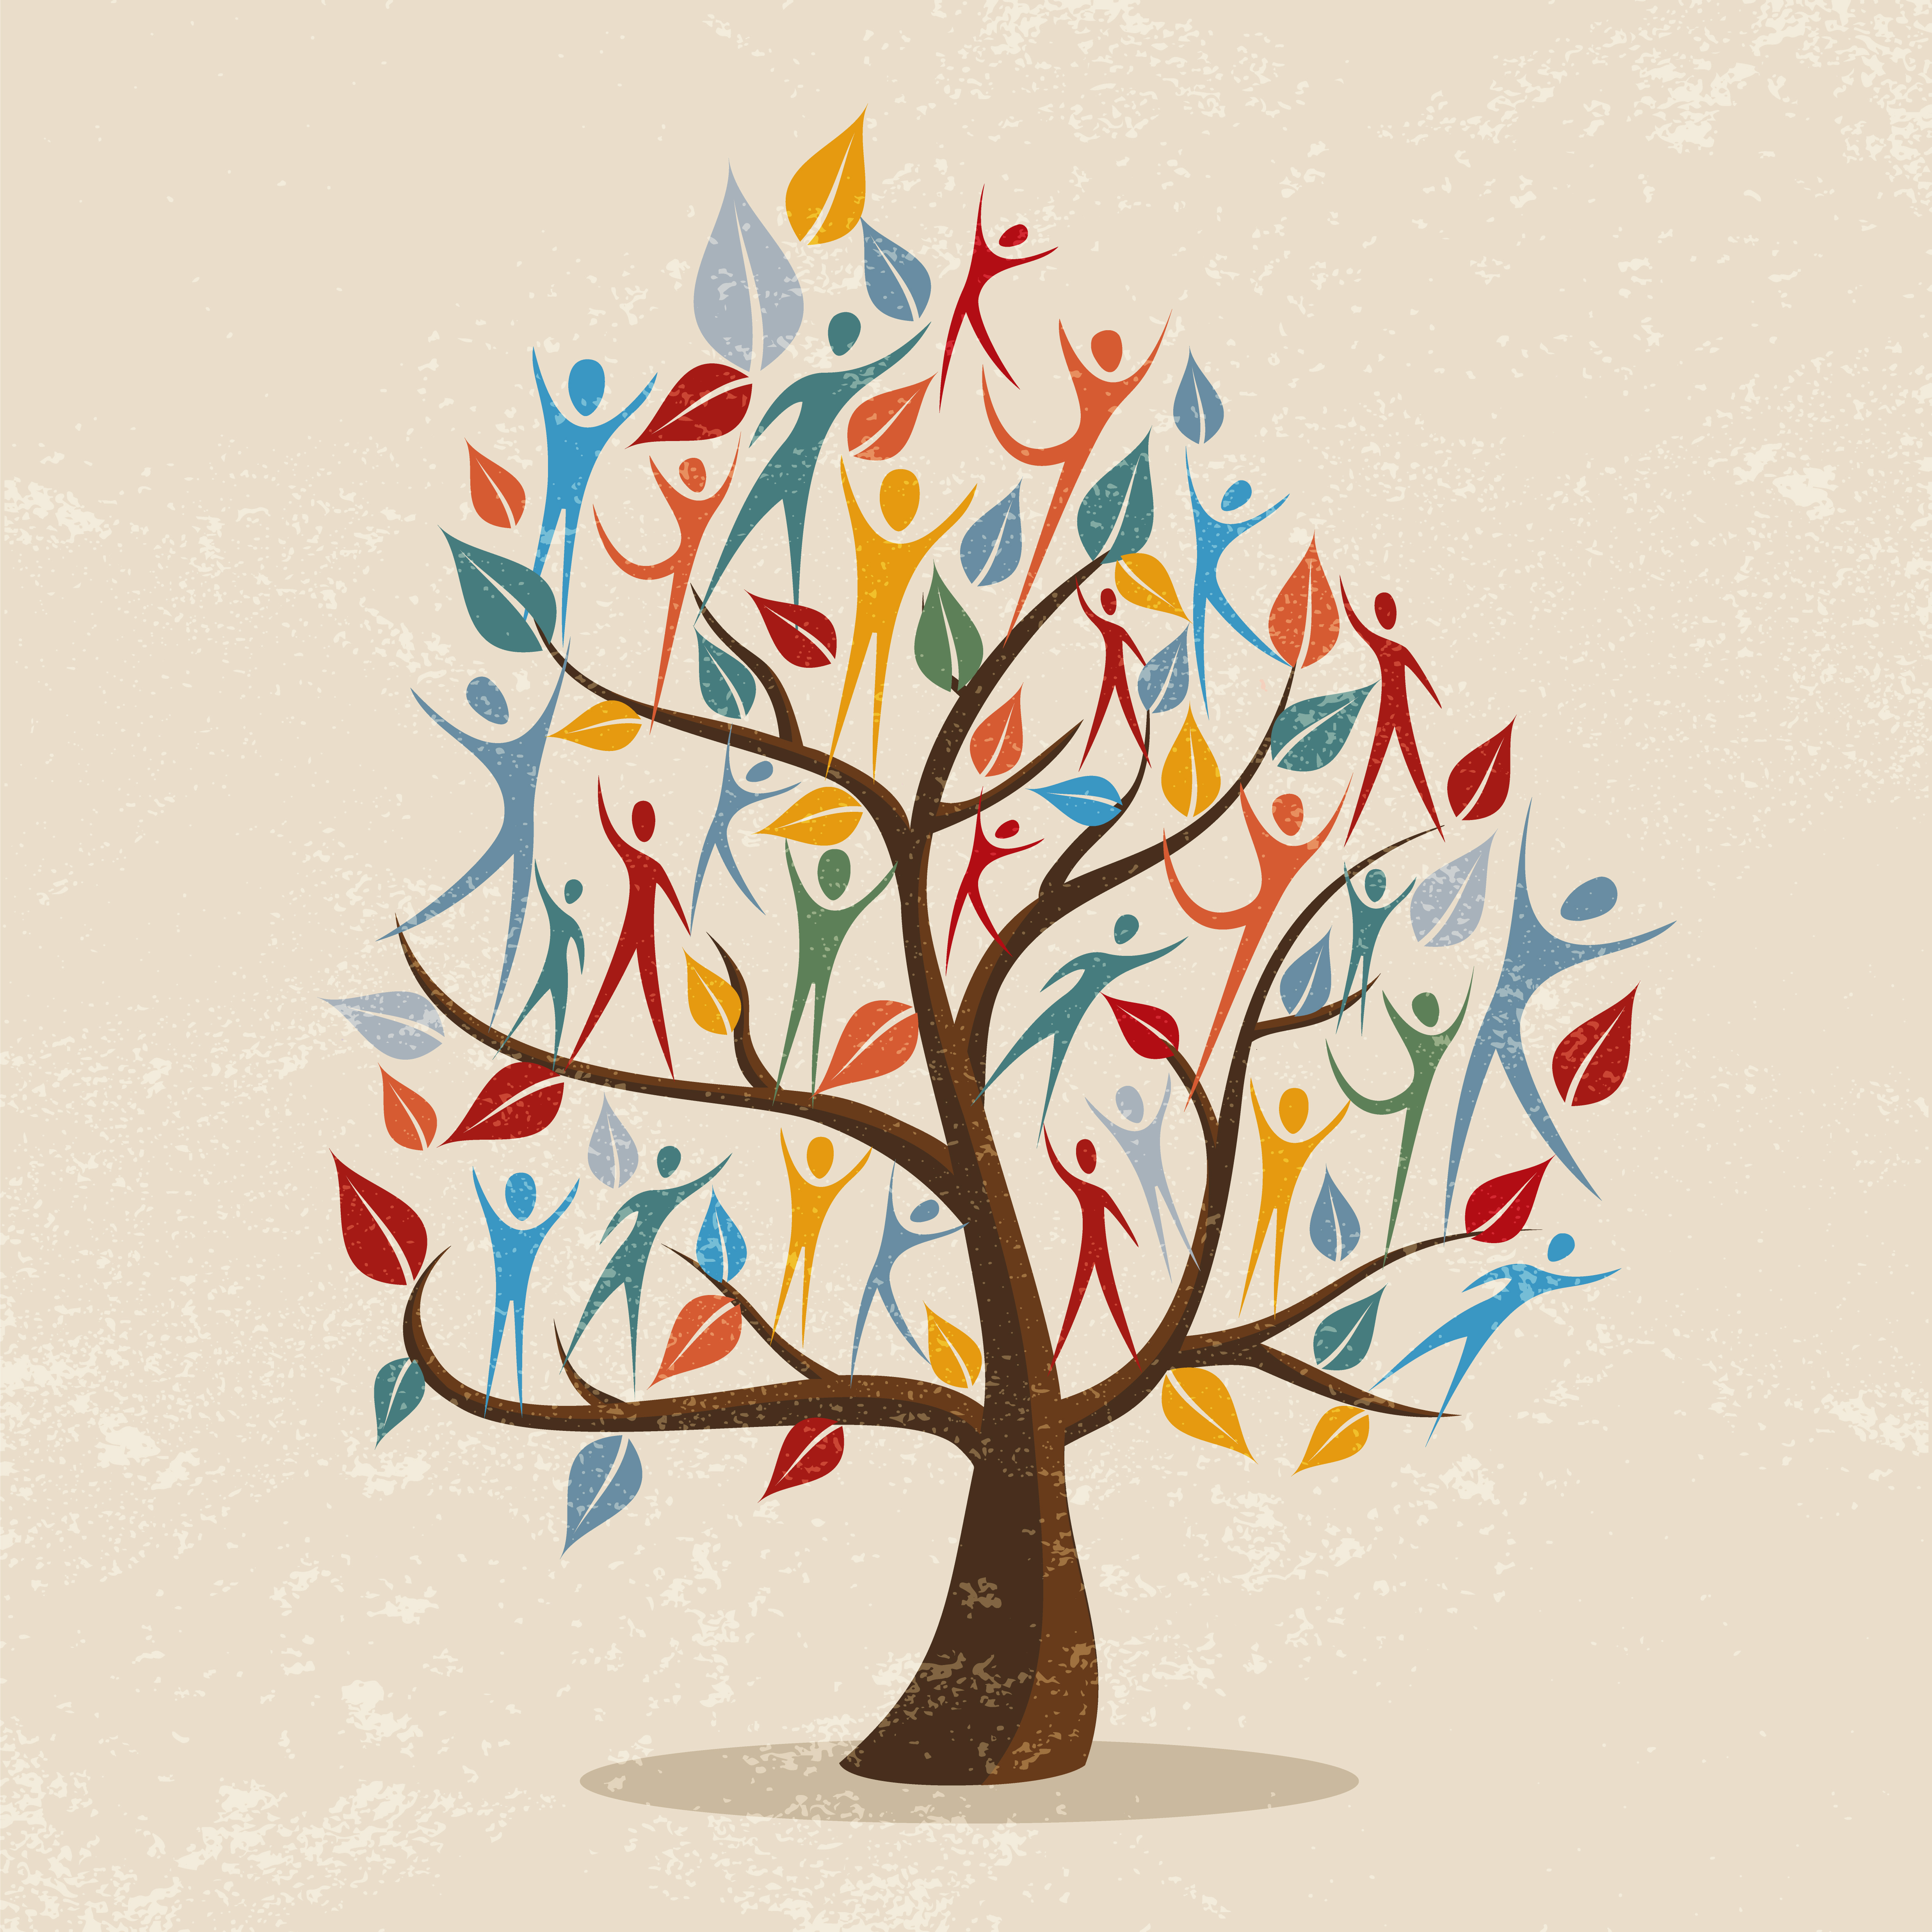 Tree image with colorful leaves and humans representing a family tree